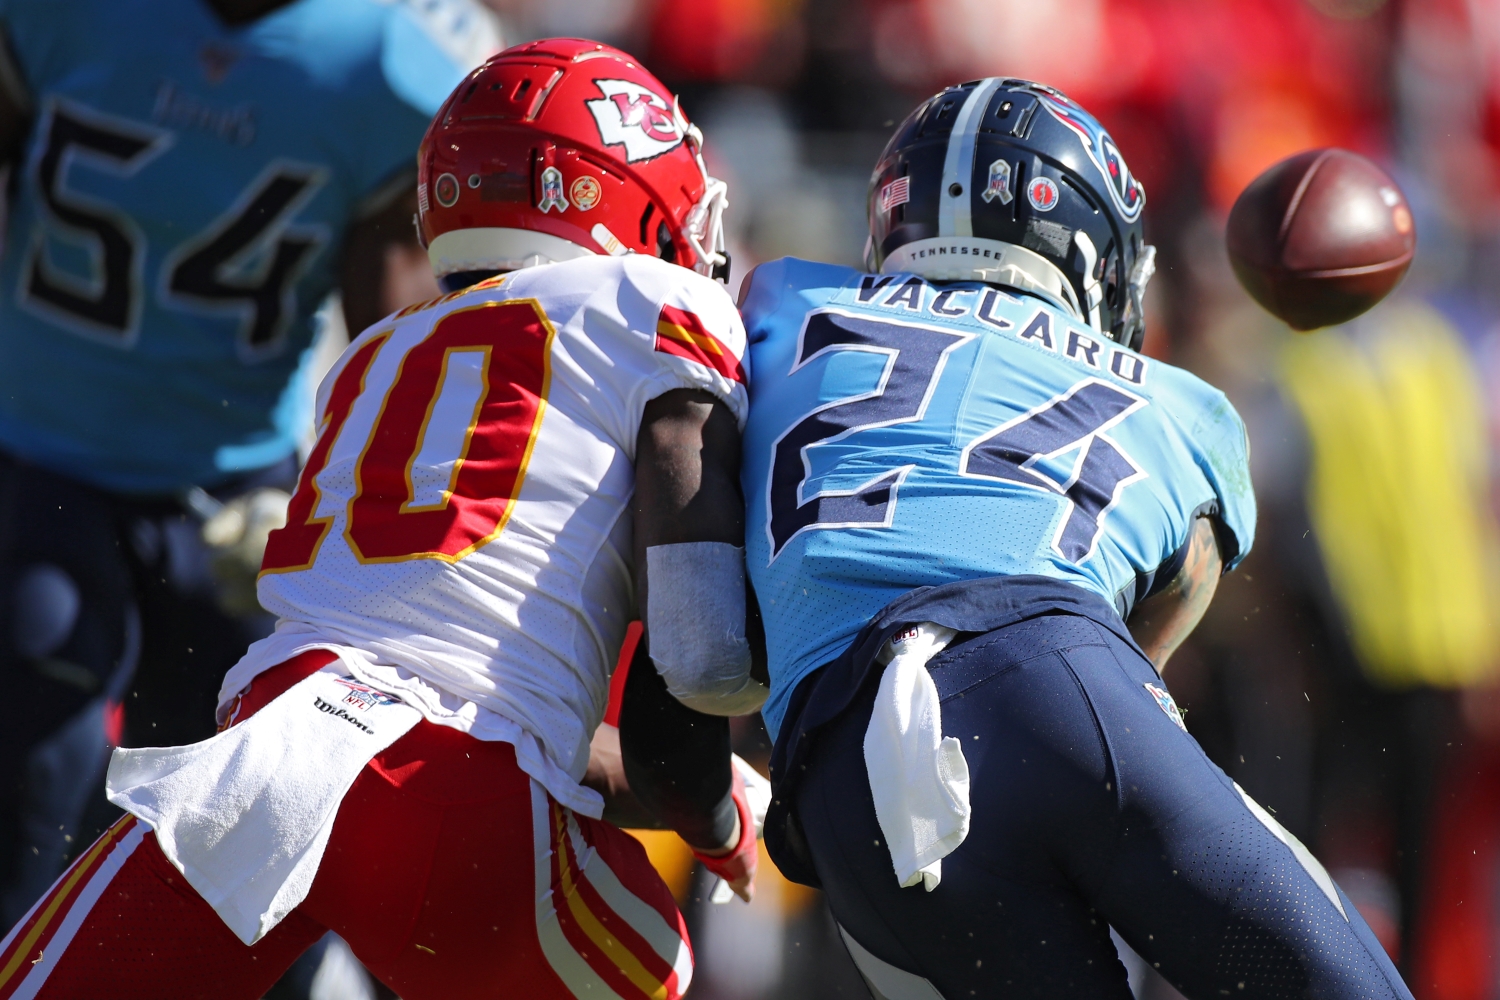 Chiefs wide receiver Tyreek Hill and Titans safety Kenny Vaccaro battle for the ball during a game.